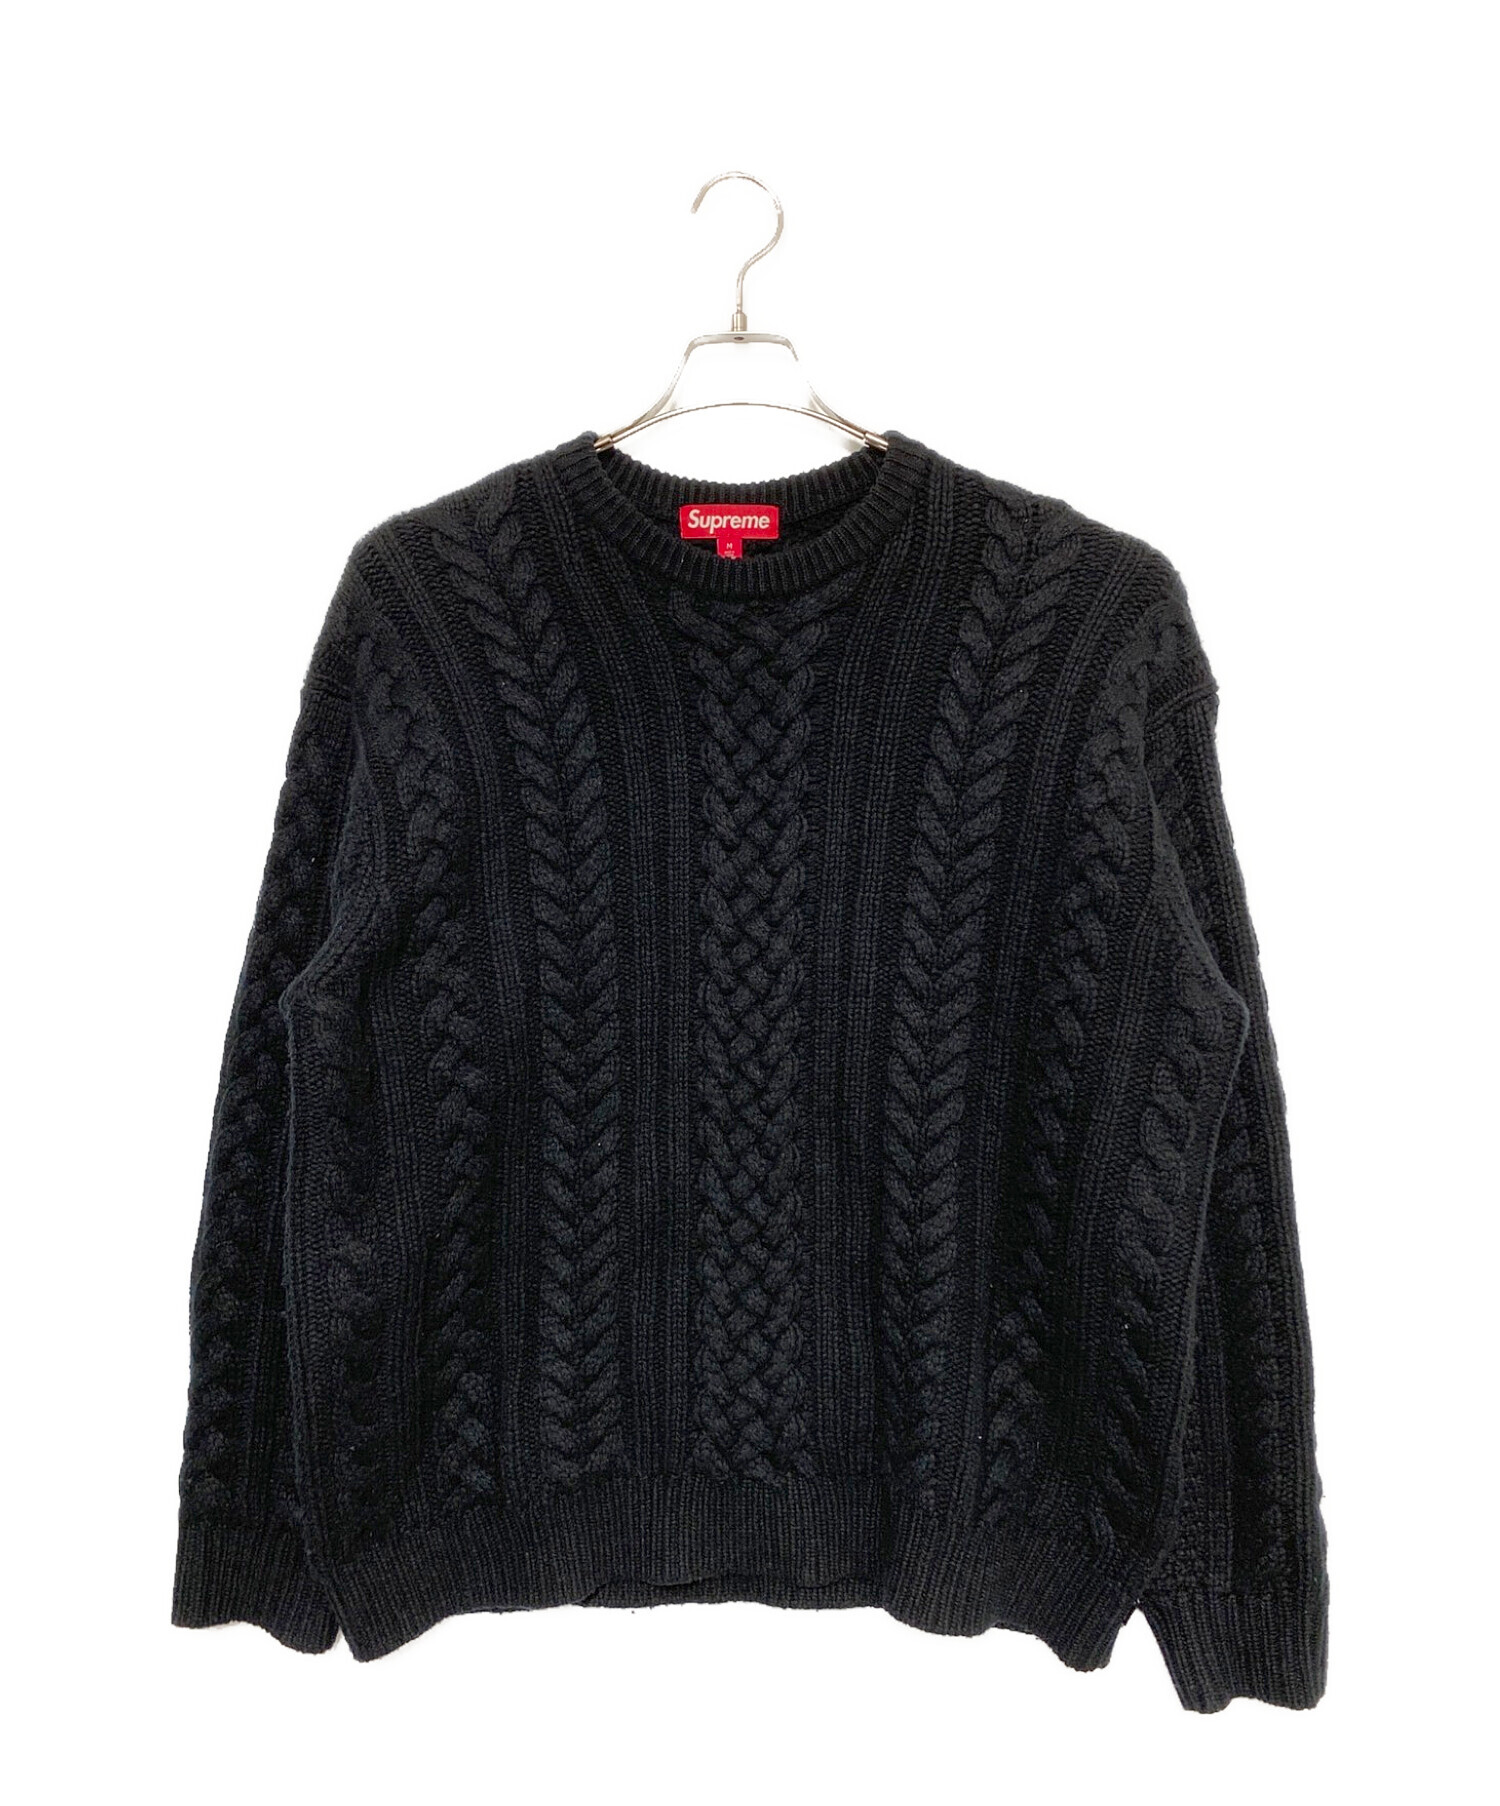 Supreme Applique Cable Knit Sweater Mサイズシュプリーム - トップス